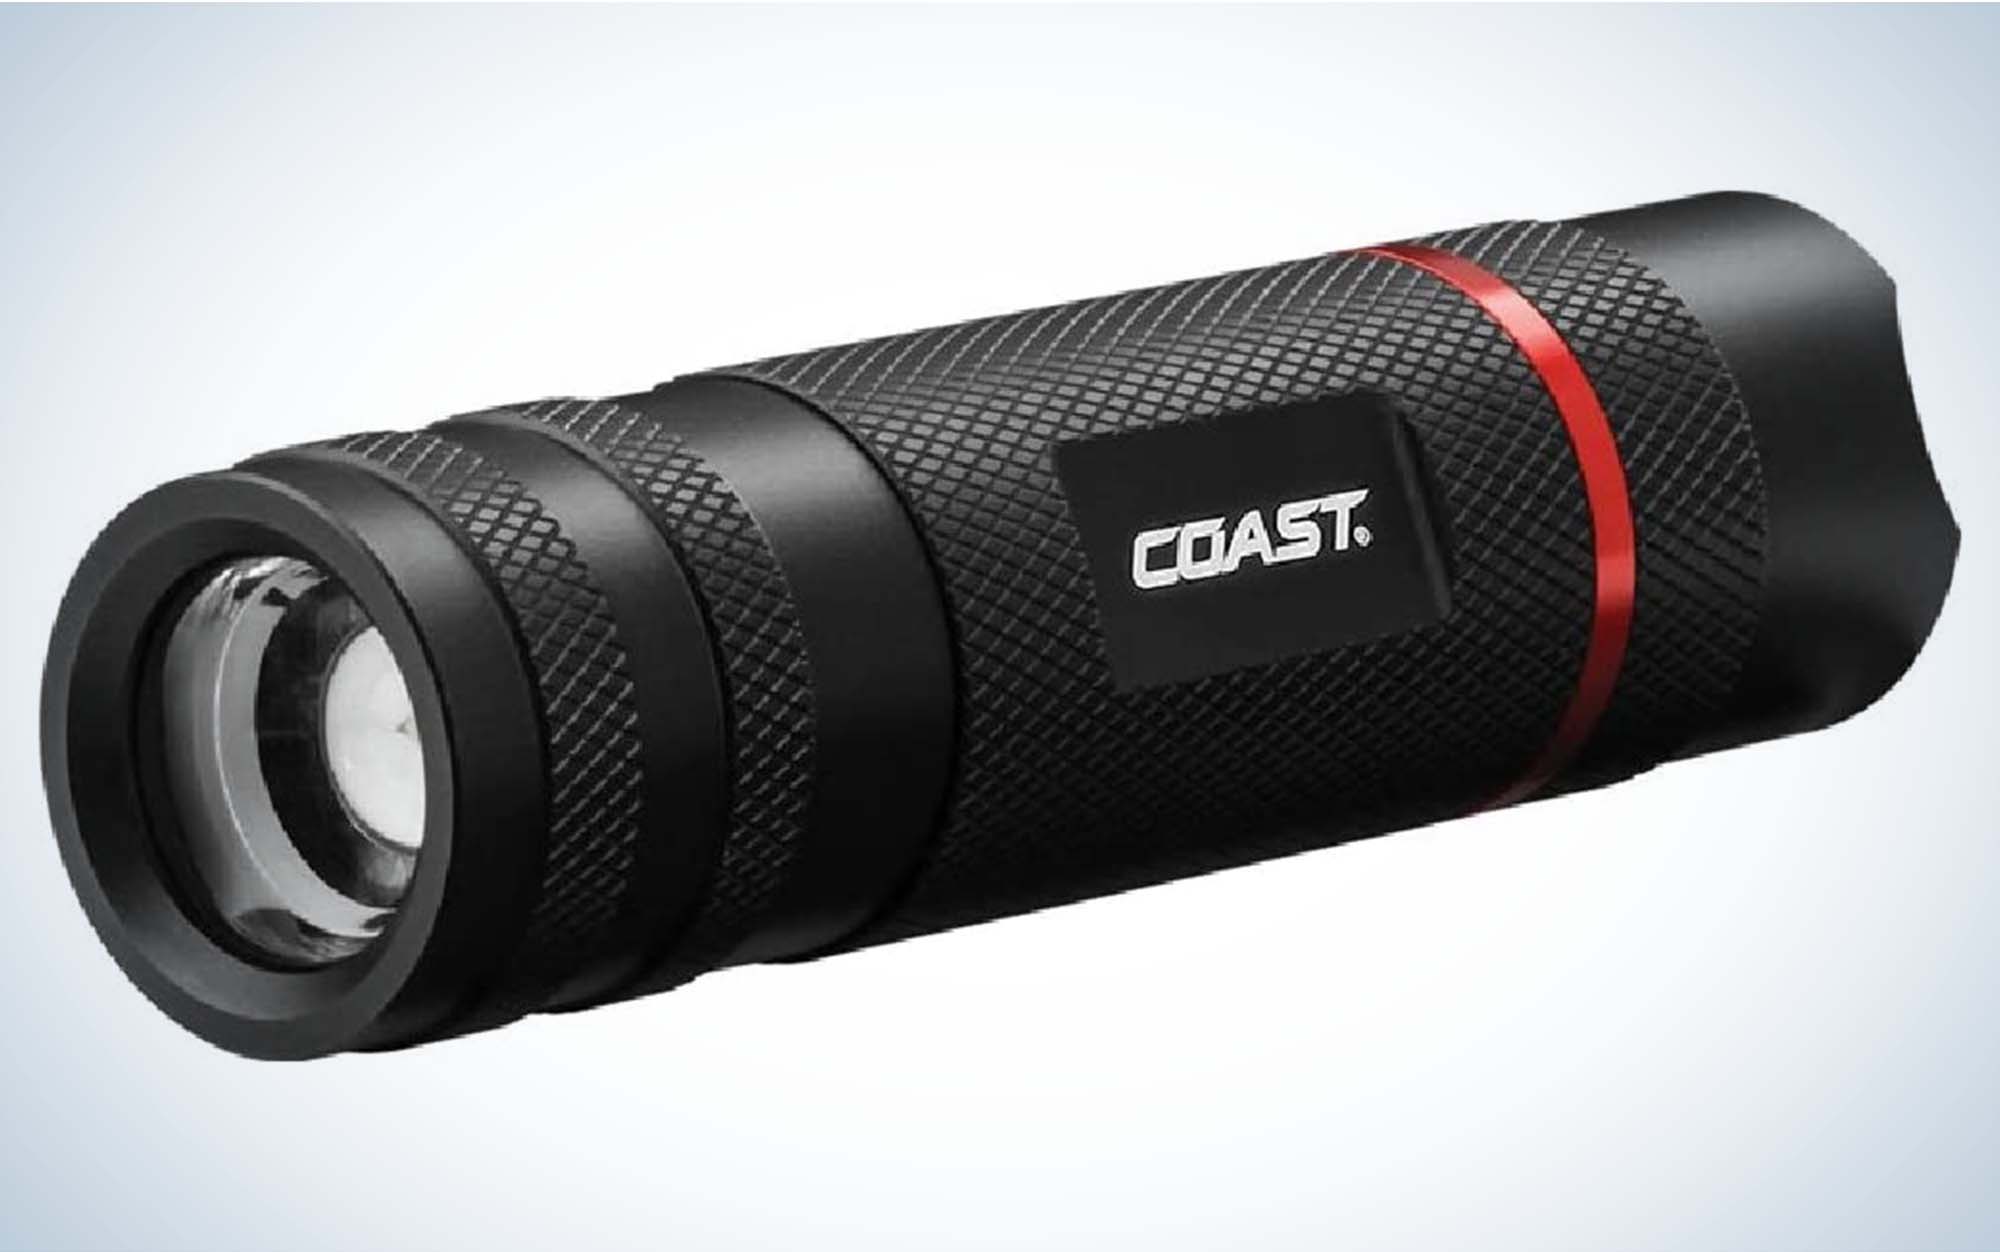 The Coast G29 is the best budget hunting flashlight.